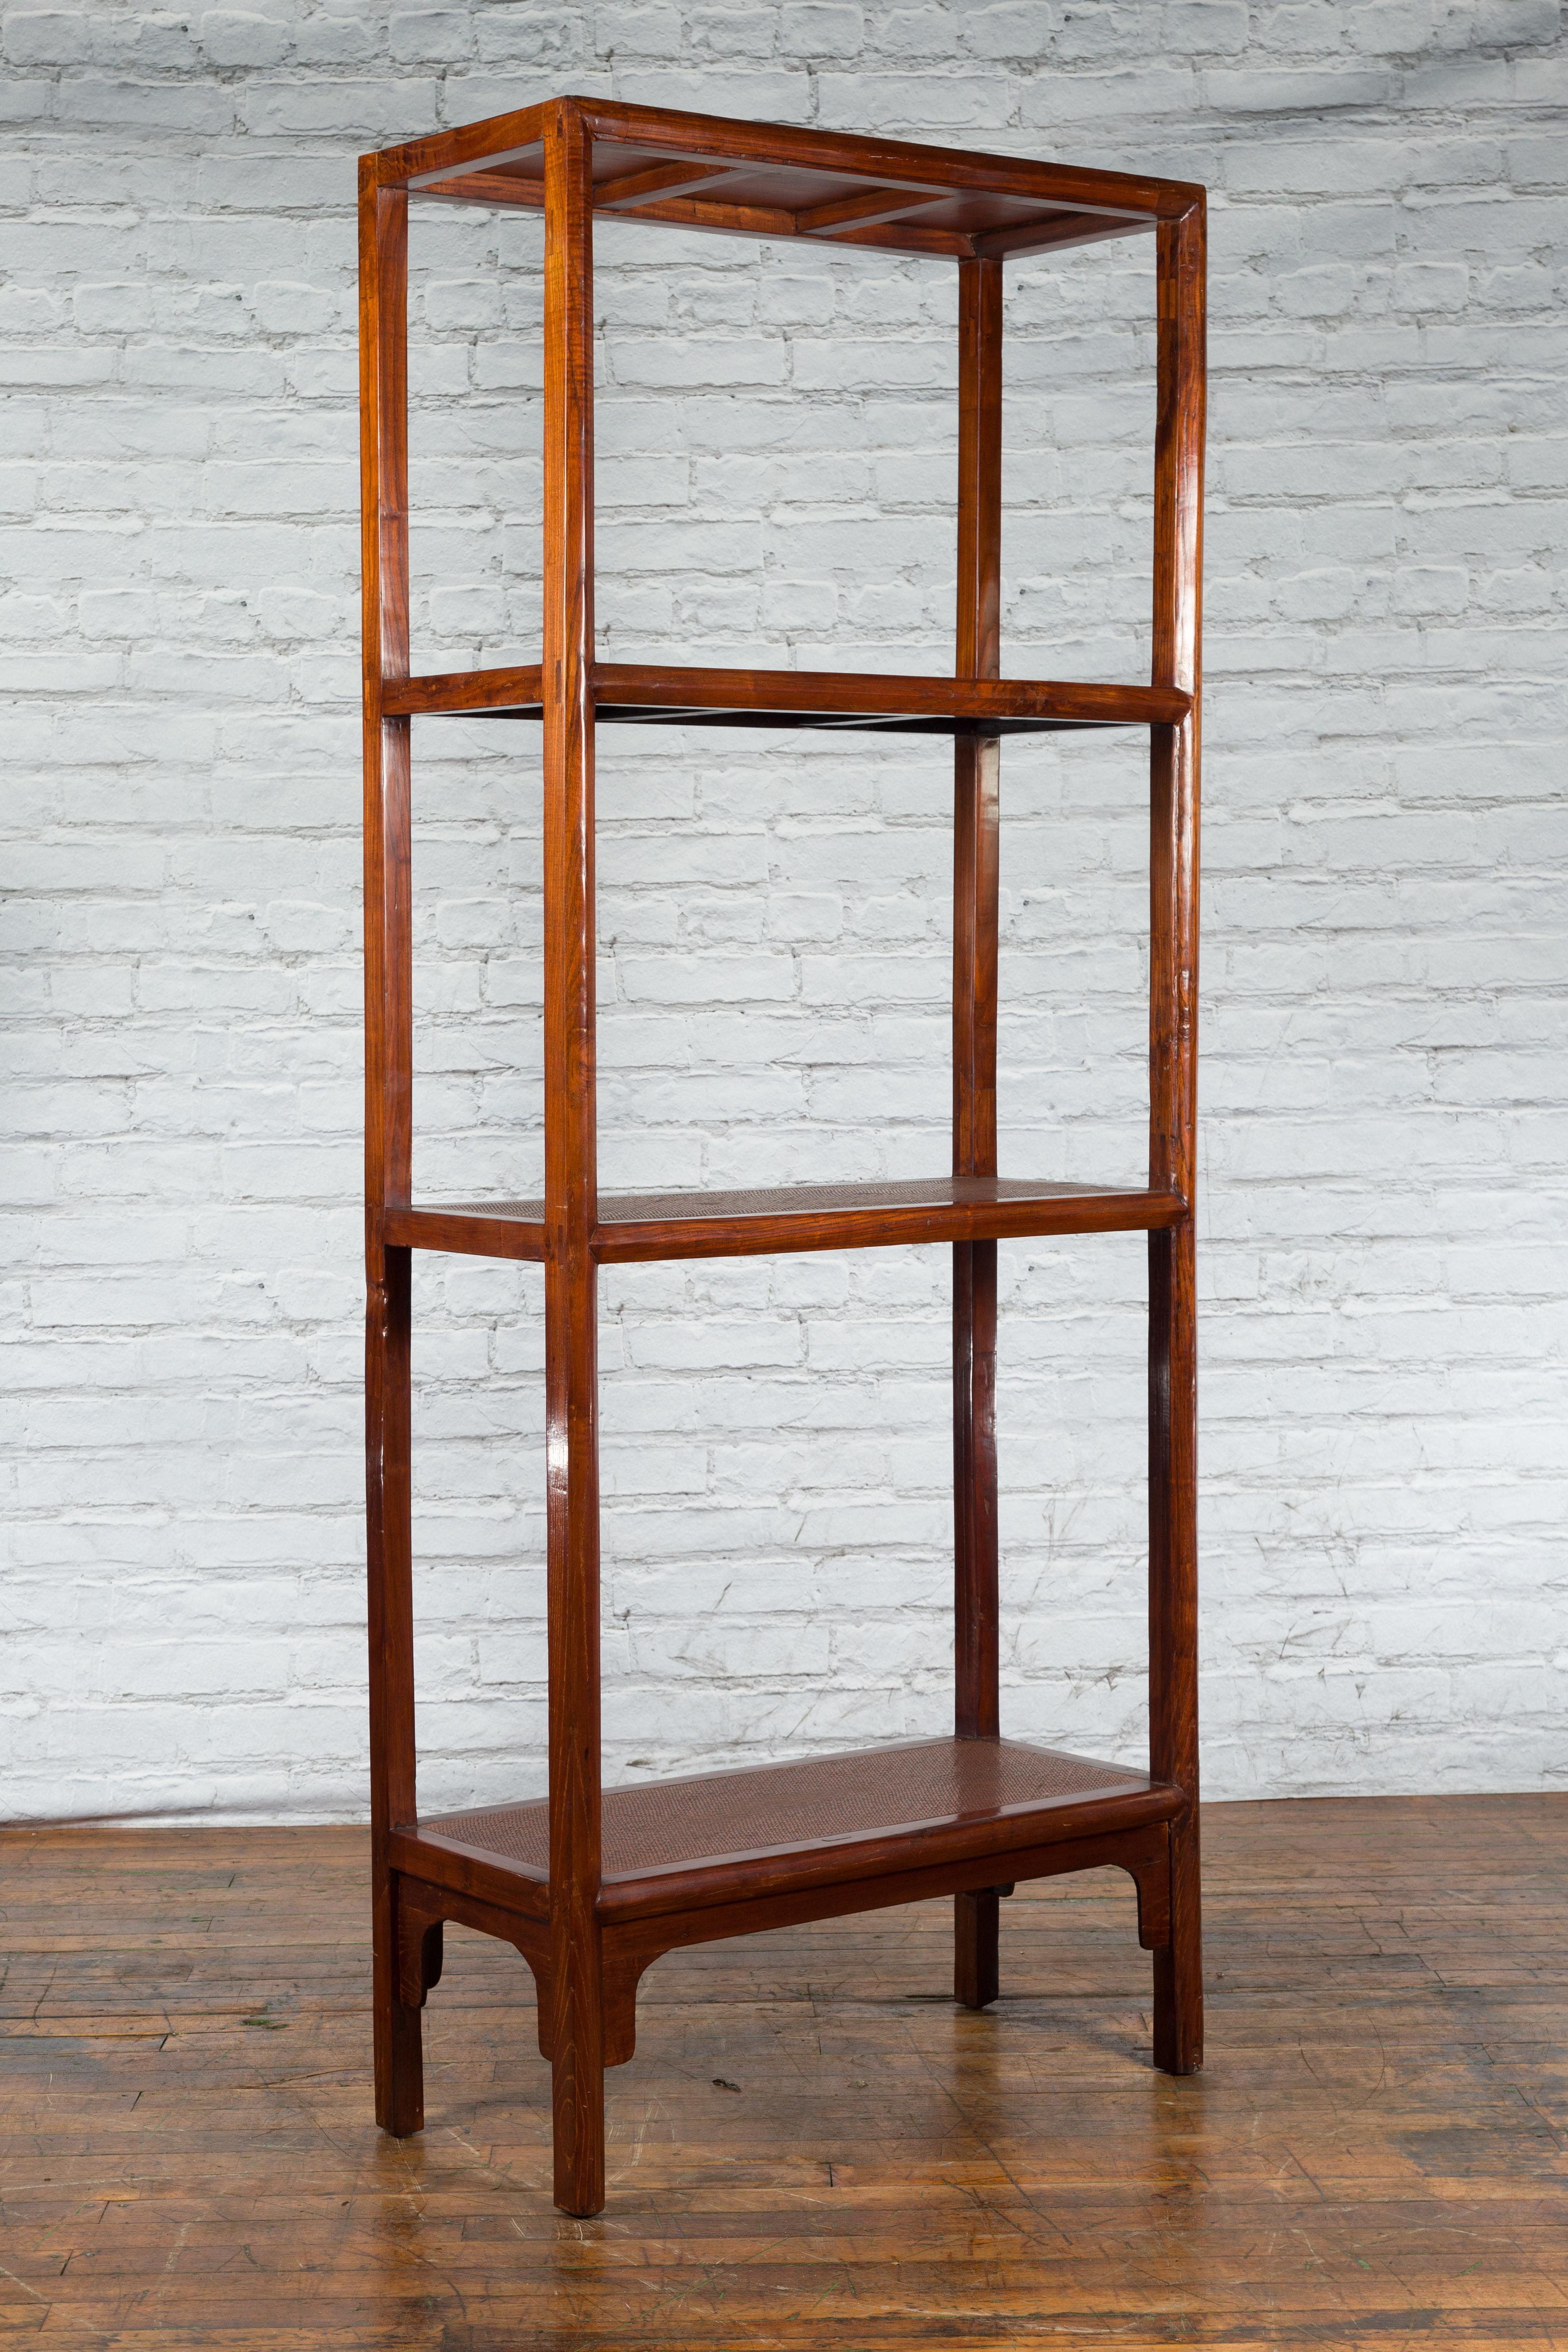 Chinese Early 20th Century Wooden Bookcase with Woven Rattan Shelves and Apron For Sale 4